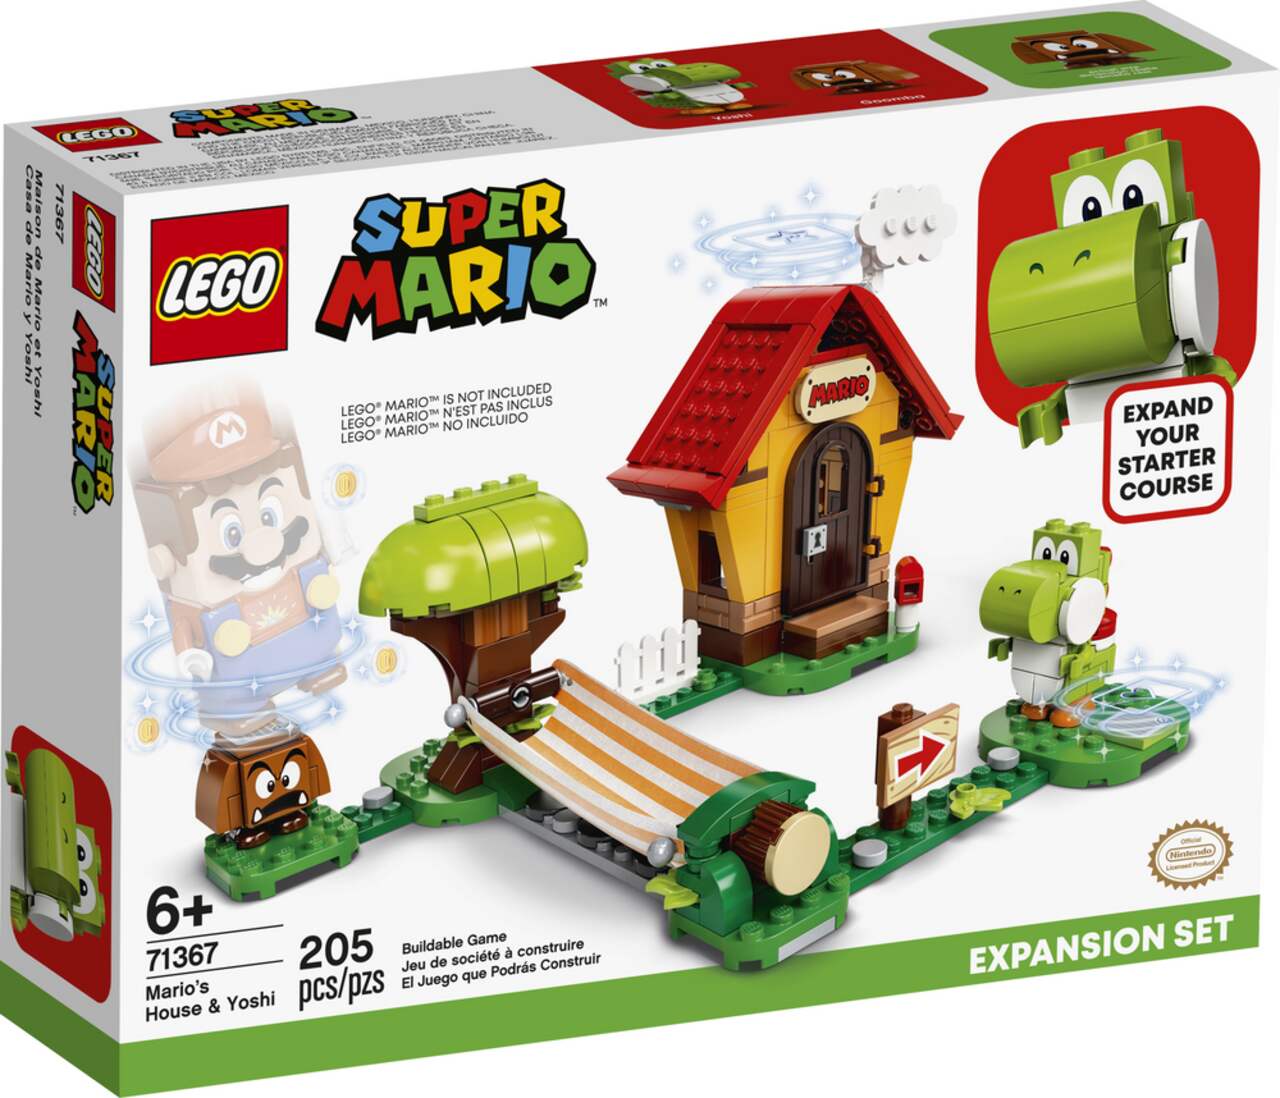 https://media-www.canadiantire.ca/product/seasonal-gardening/toys/toys-games/0501699/lego-super-mario-mario-s-house-yoshi-expansion-set-bed11f0a-ae5b-459b-bea5-9c4ff0c7b033.png?imdensity=1&imwidth=640&impolicy=mZoom